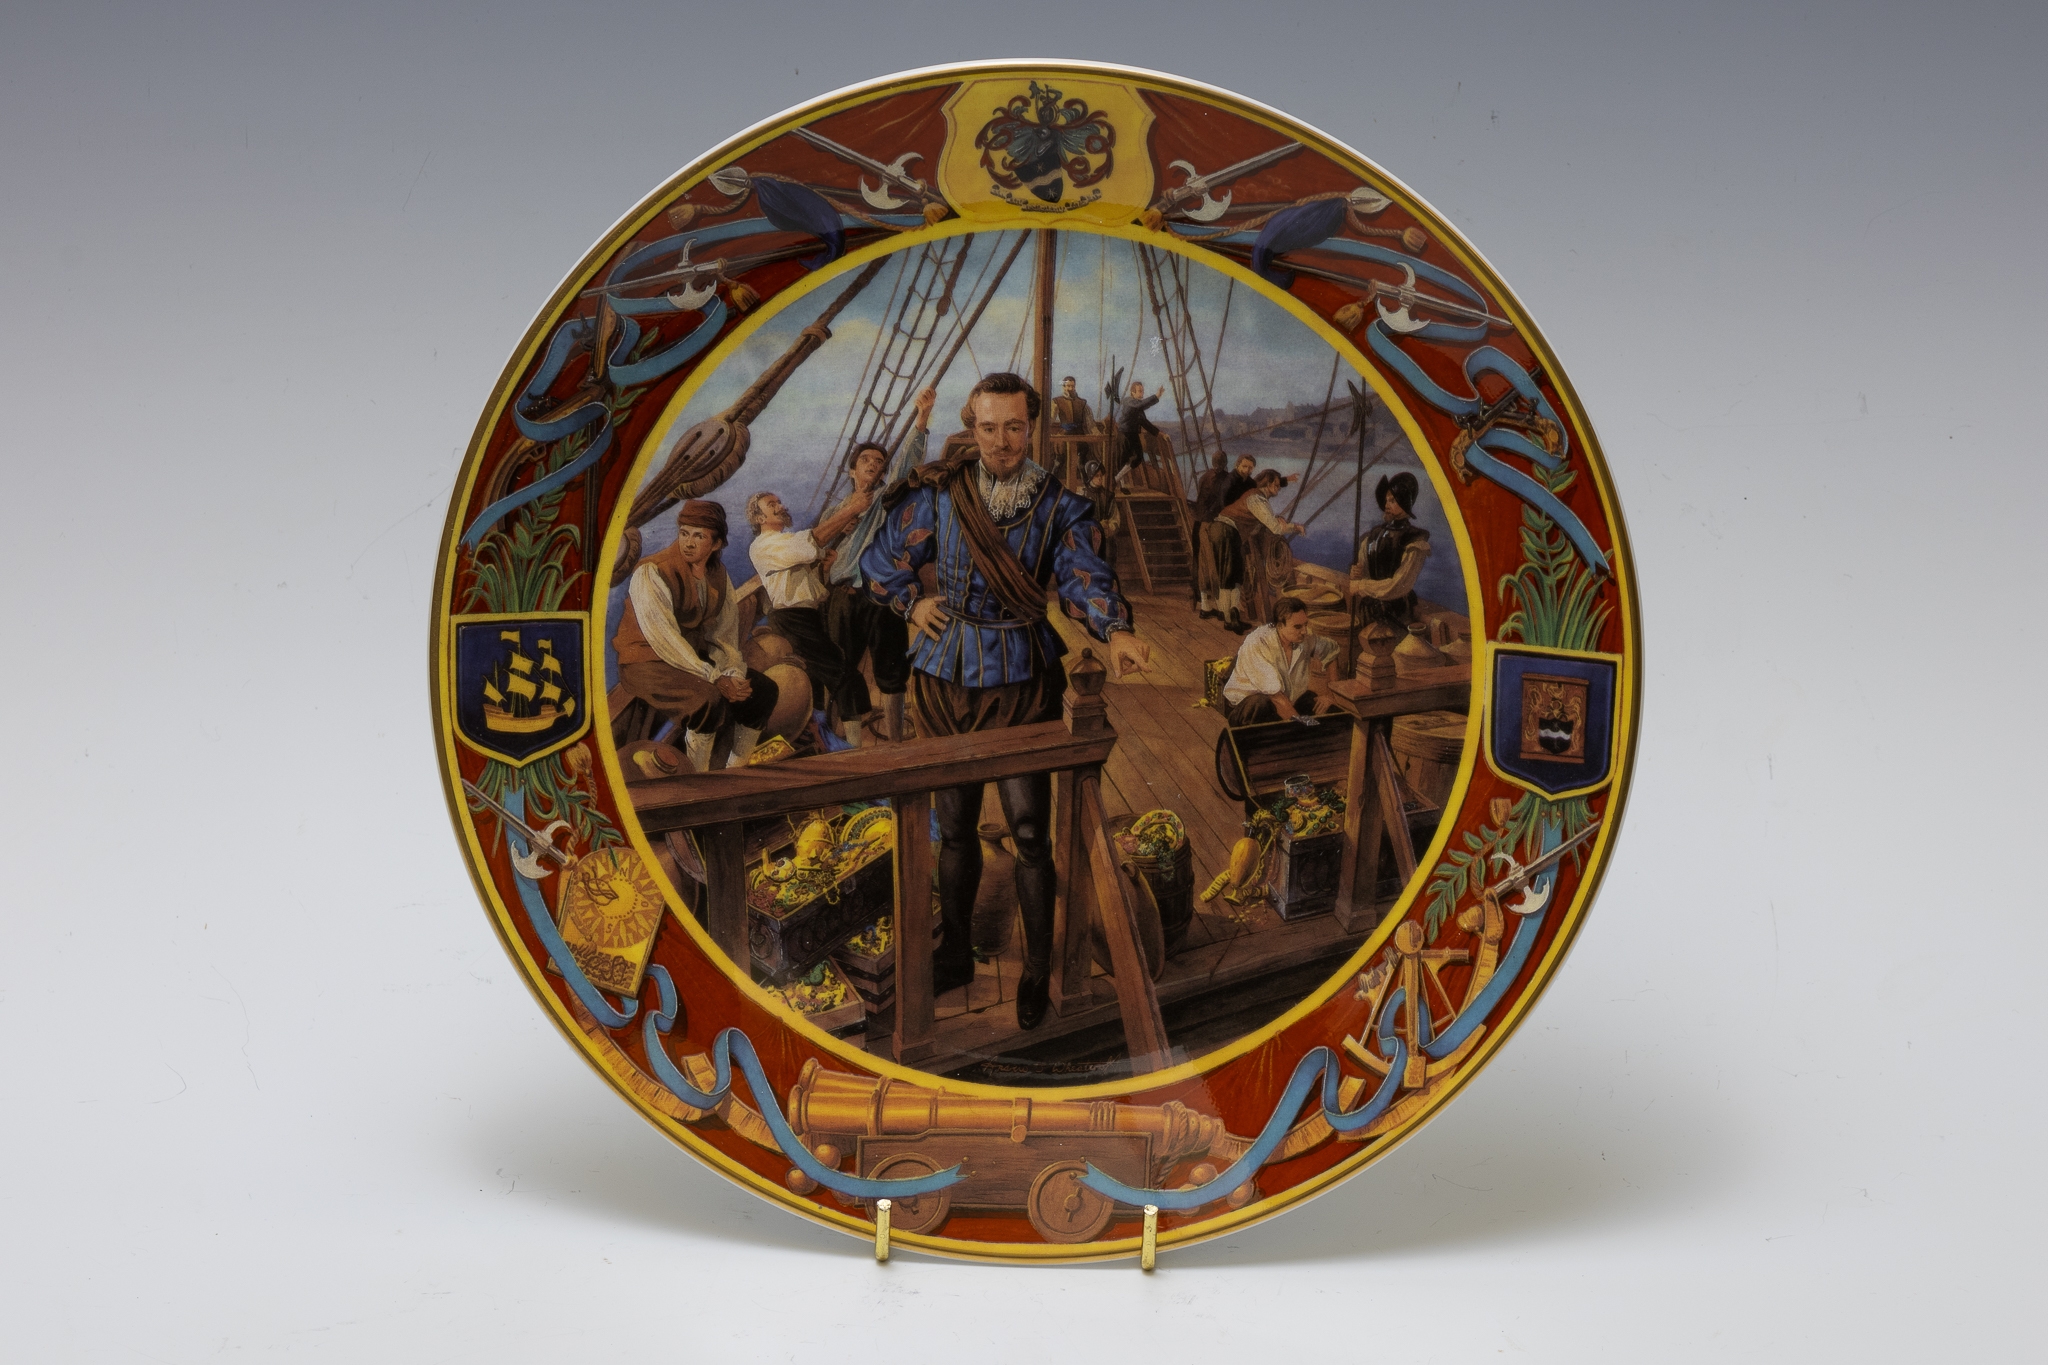 A Fine China Collector Plate "Nelson at Trafalgar and Wellington at Waterloo" by the Royal Doulton, 